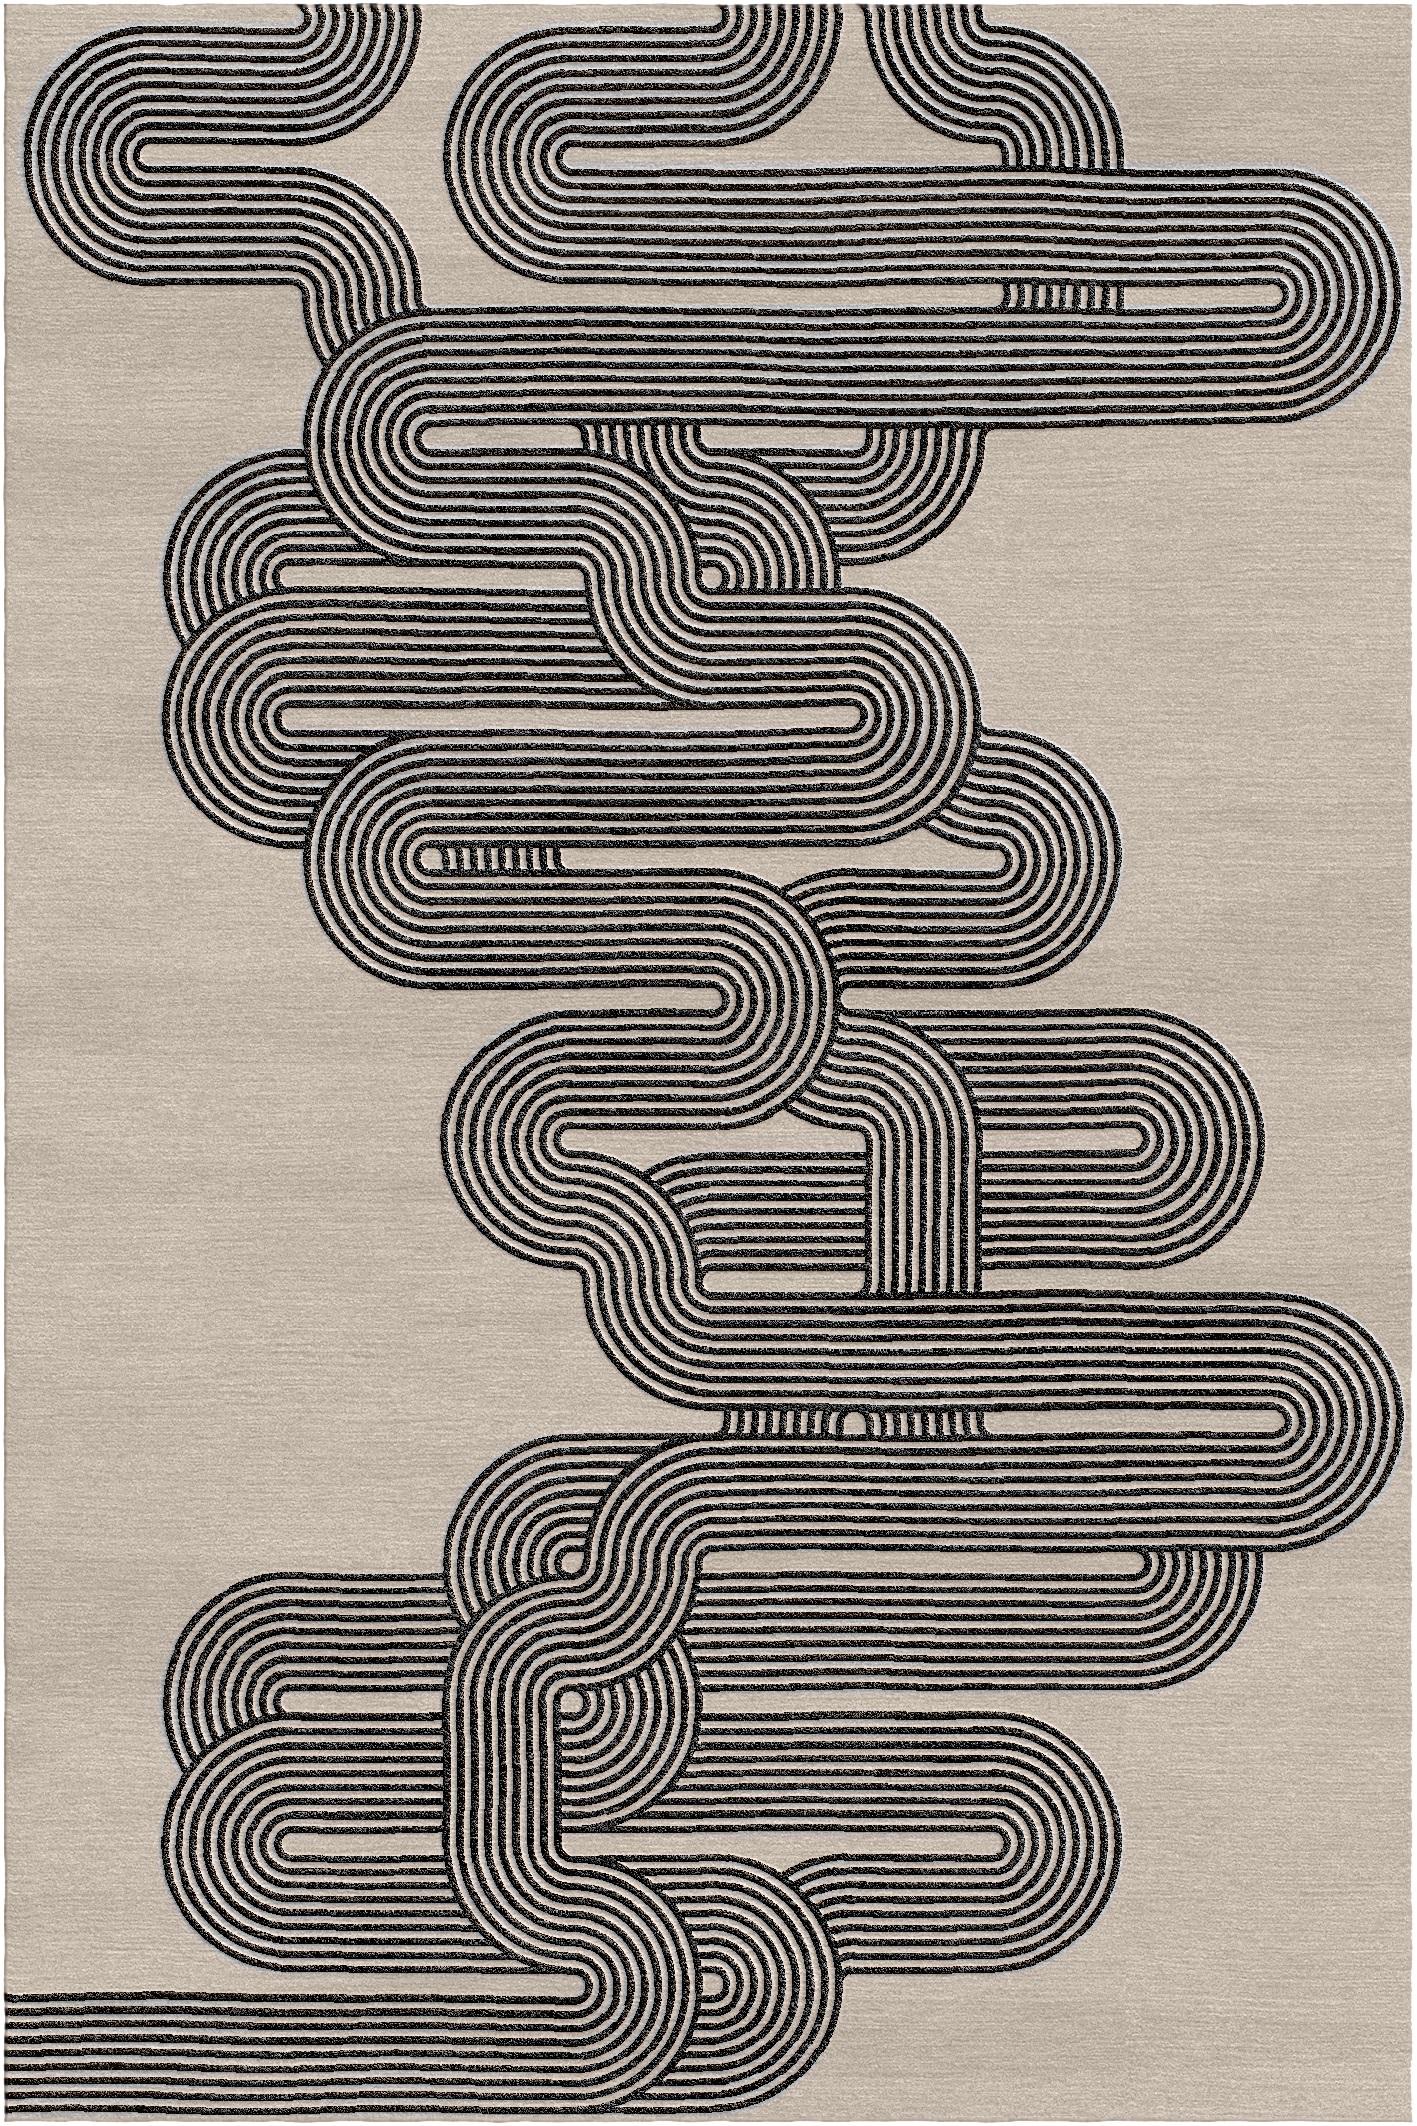 Curve rug I by Giulio Brambilla
Dimensions: D 300 x W 200 x H 1.5 cm
Materials: NZ wool, bamboo silk
Available in other colors.

A striking design of strong visual impact by artist and architect Giulio Brambilla, this rug will make a statement